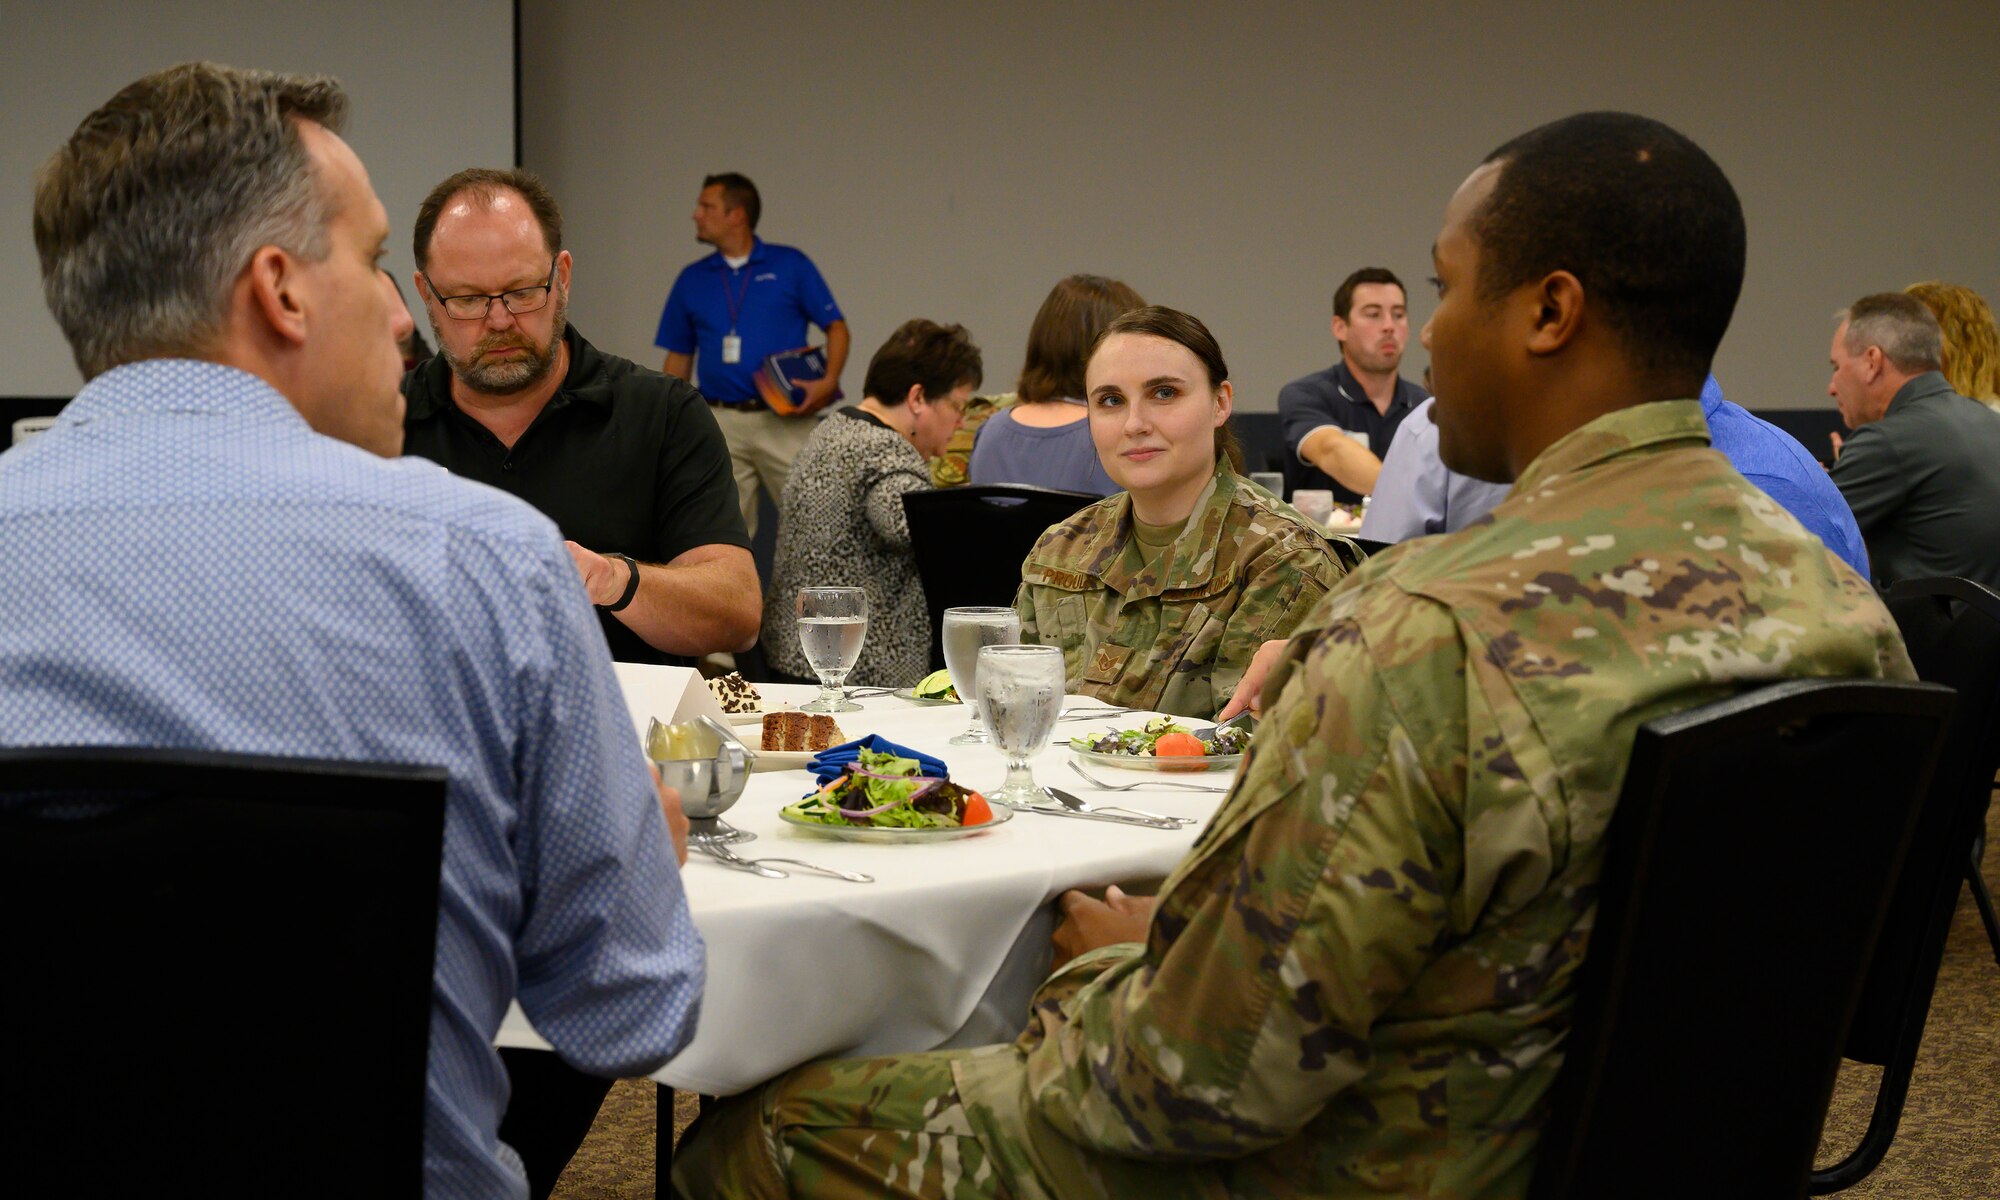 Staff Sgts. Rebecca Proulx and Mario Fosque, both with the 88th Medical Group, have lunch with Leadership Dayton program members July 14 in the Hope Hotel outside Wright-Patterson Air Force Base. The Airmen had recently returned from deployments and shared their experiences with the group. (U.S. Air Force photo by R.J. Oriez)